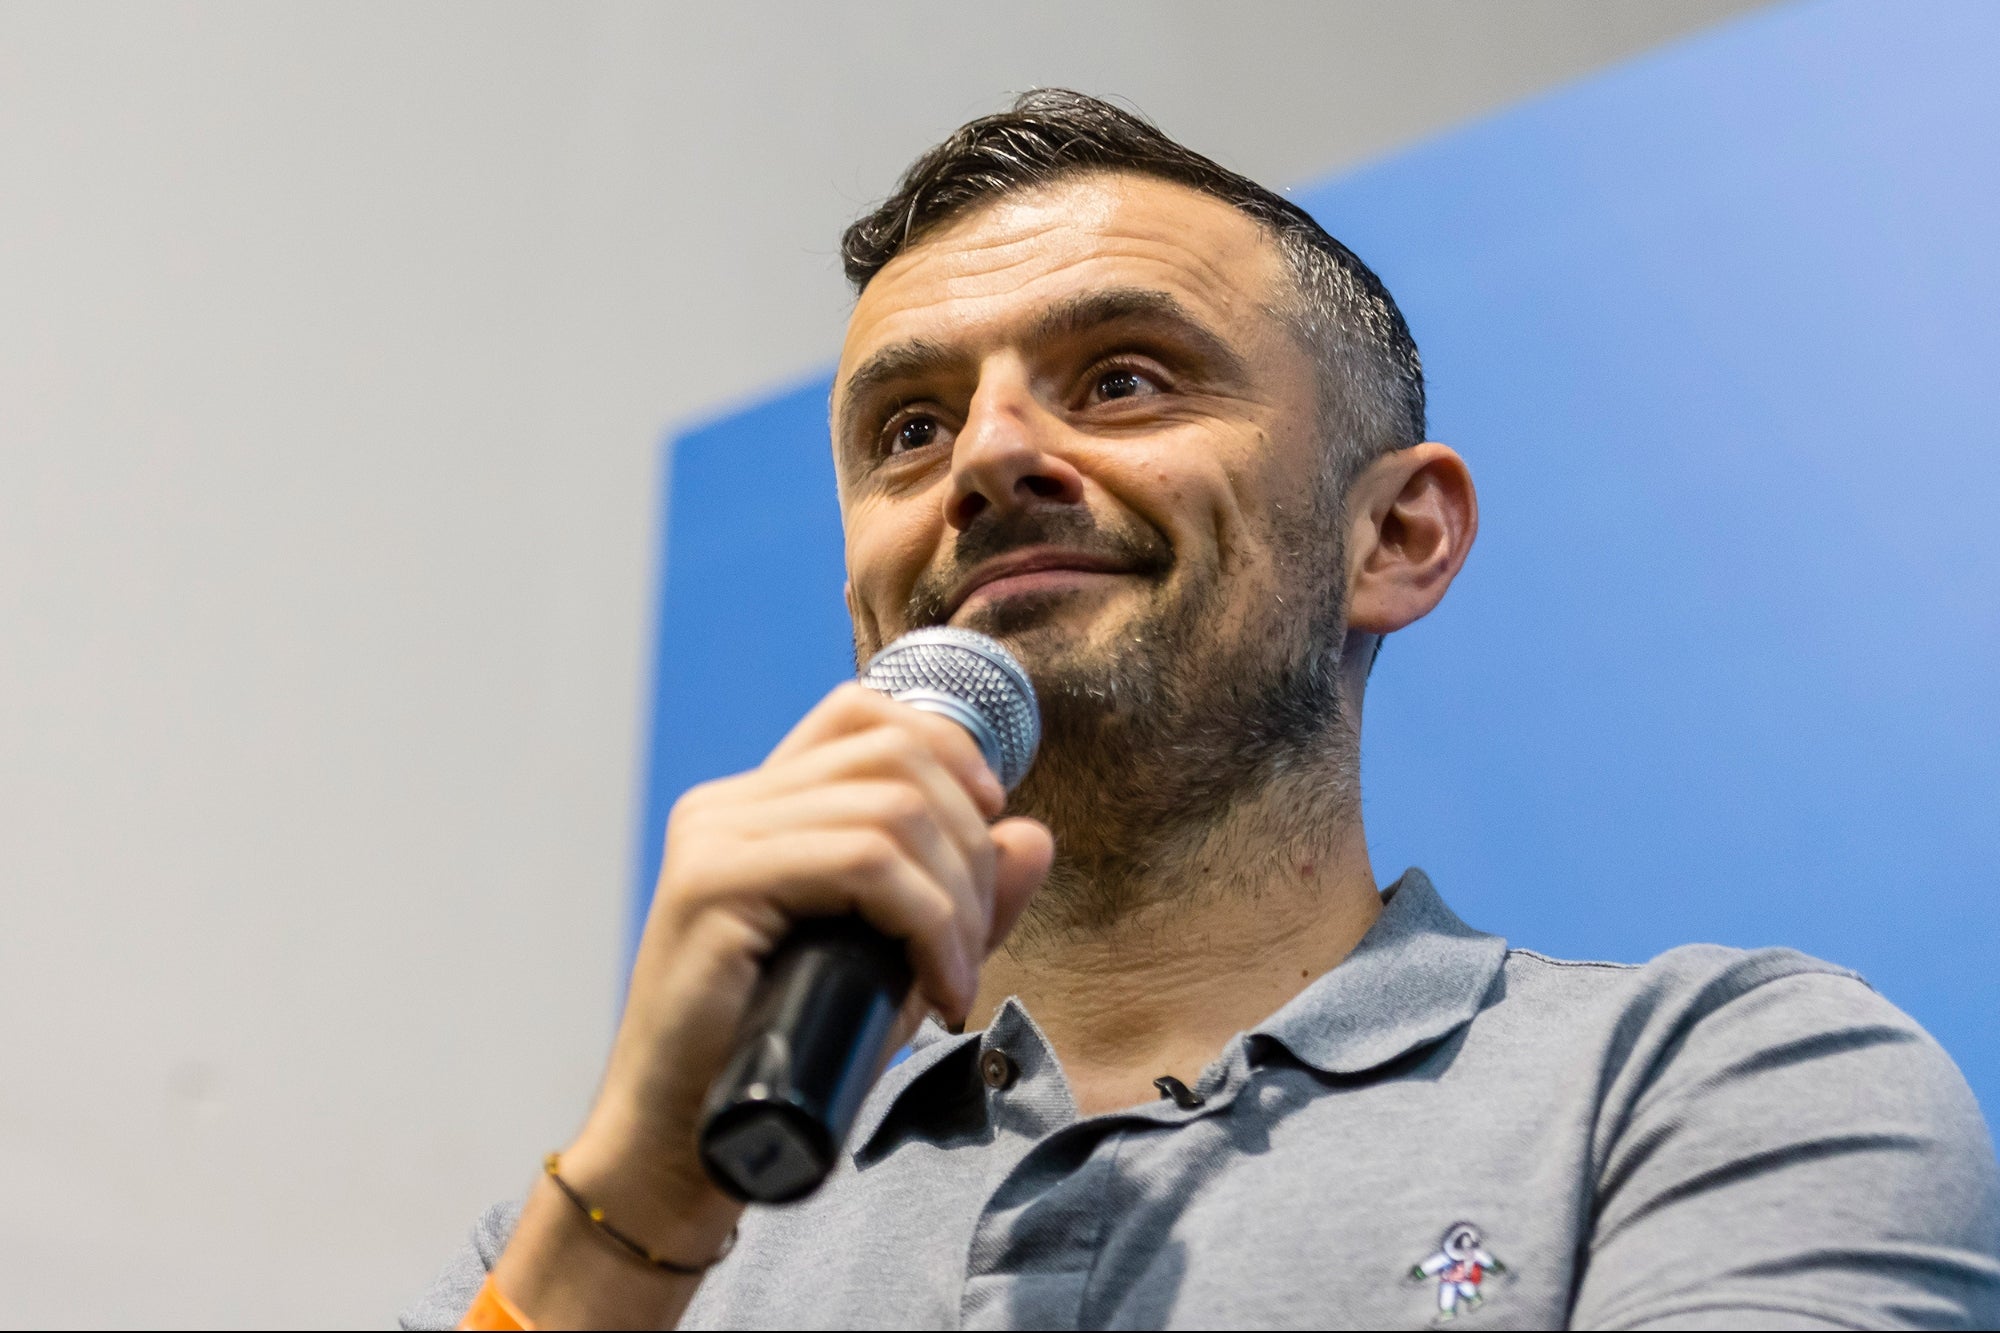 Gary Vaynerchuk to Open World's First NFT Restaurant in NYC